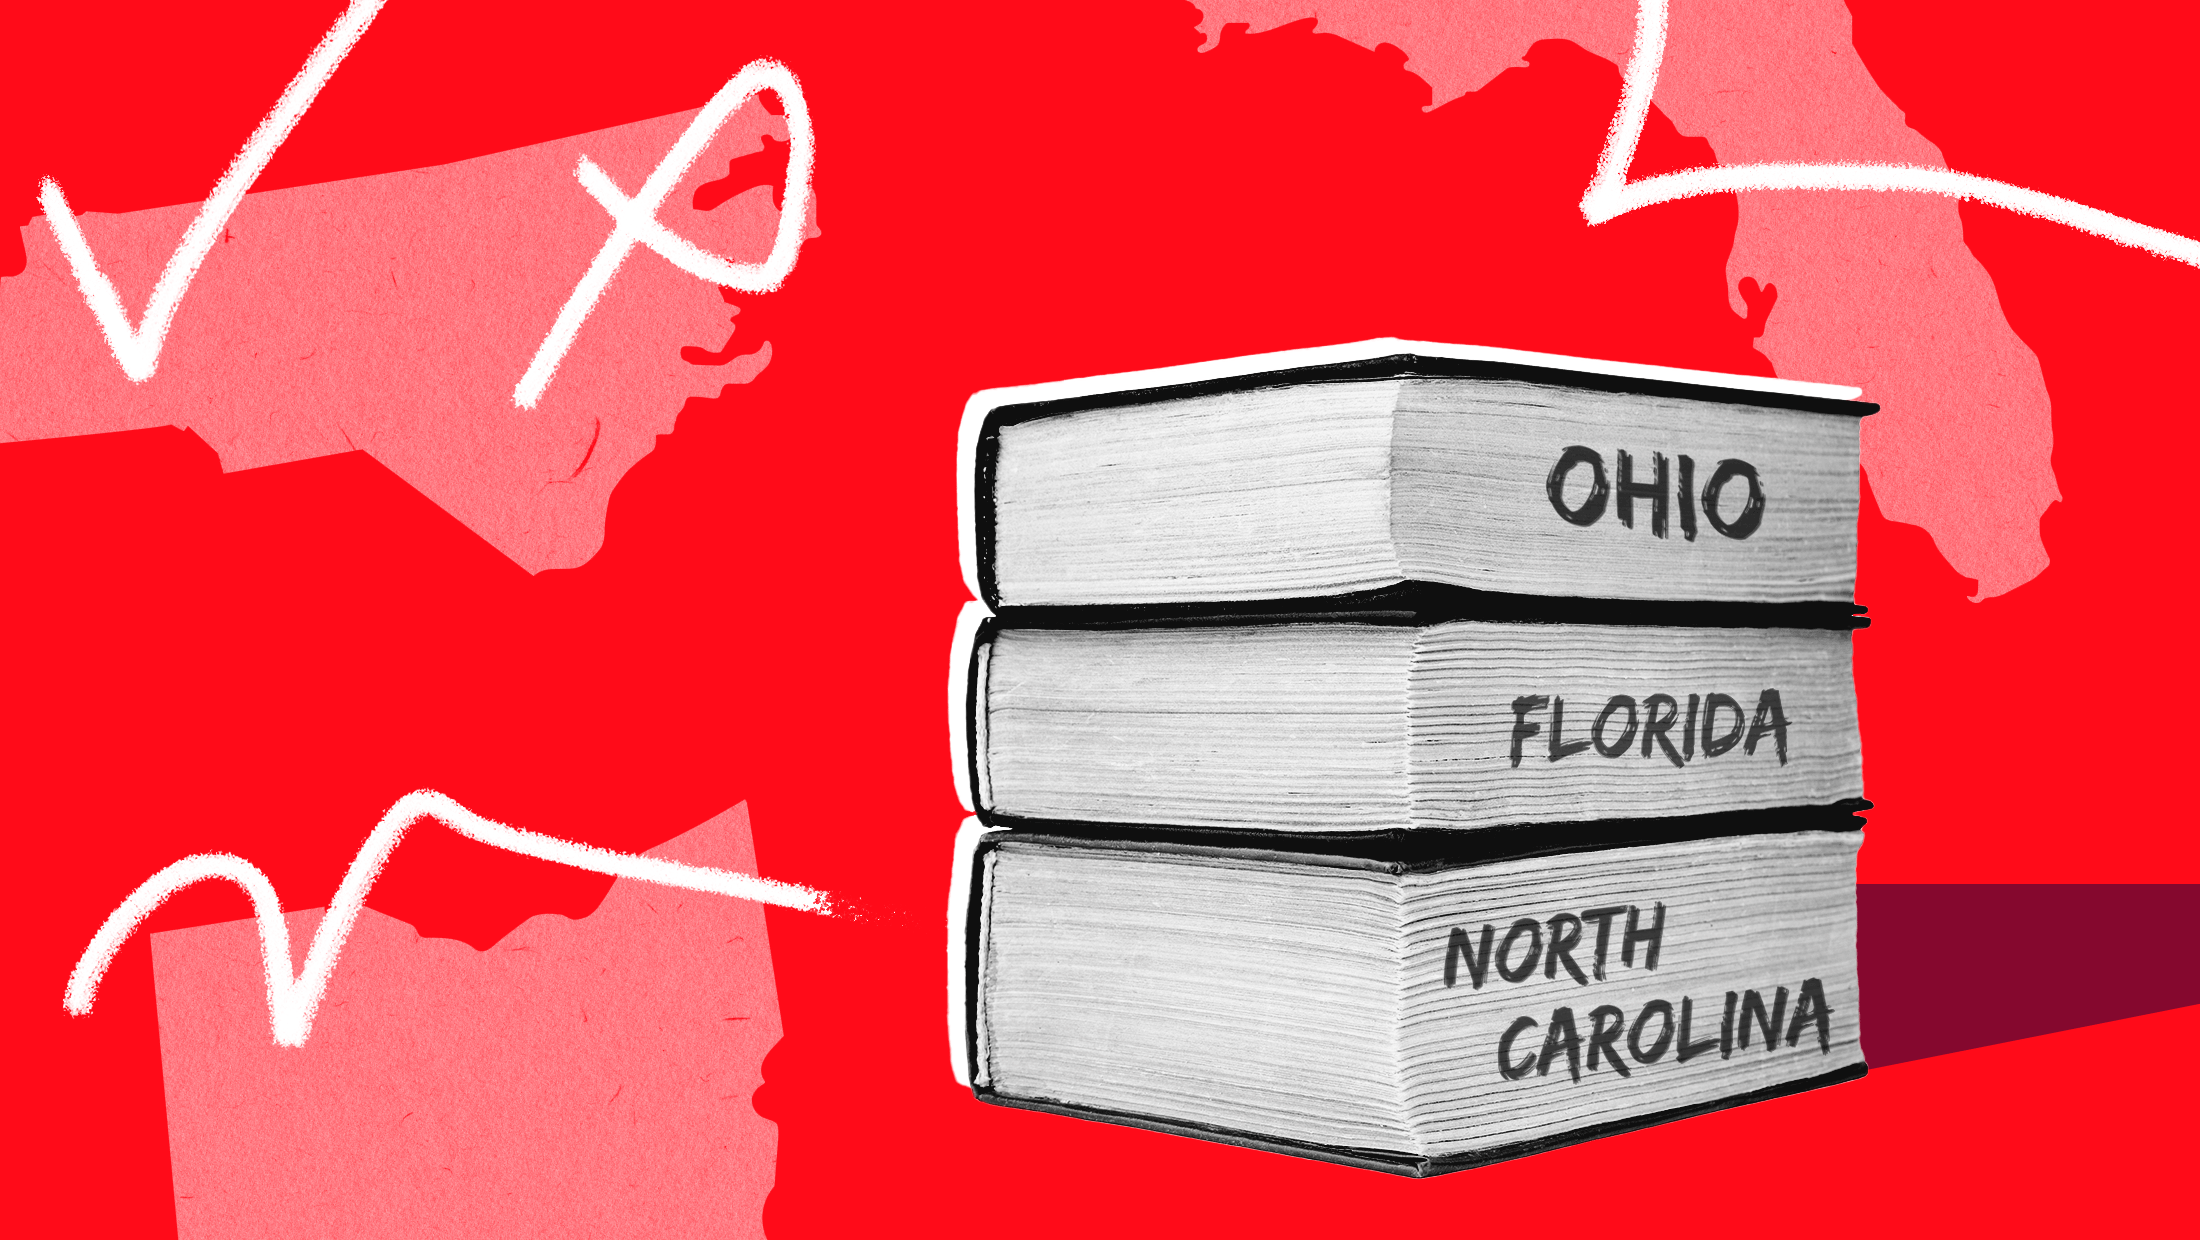 Three books stacked on top of each other with white pages, reading Ohio, Florida and North Carolina on the side of each book, in front of a red background with outlines of the 3 states.